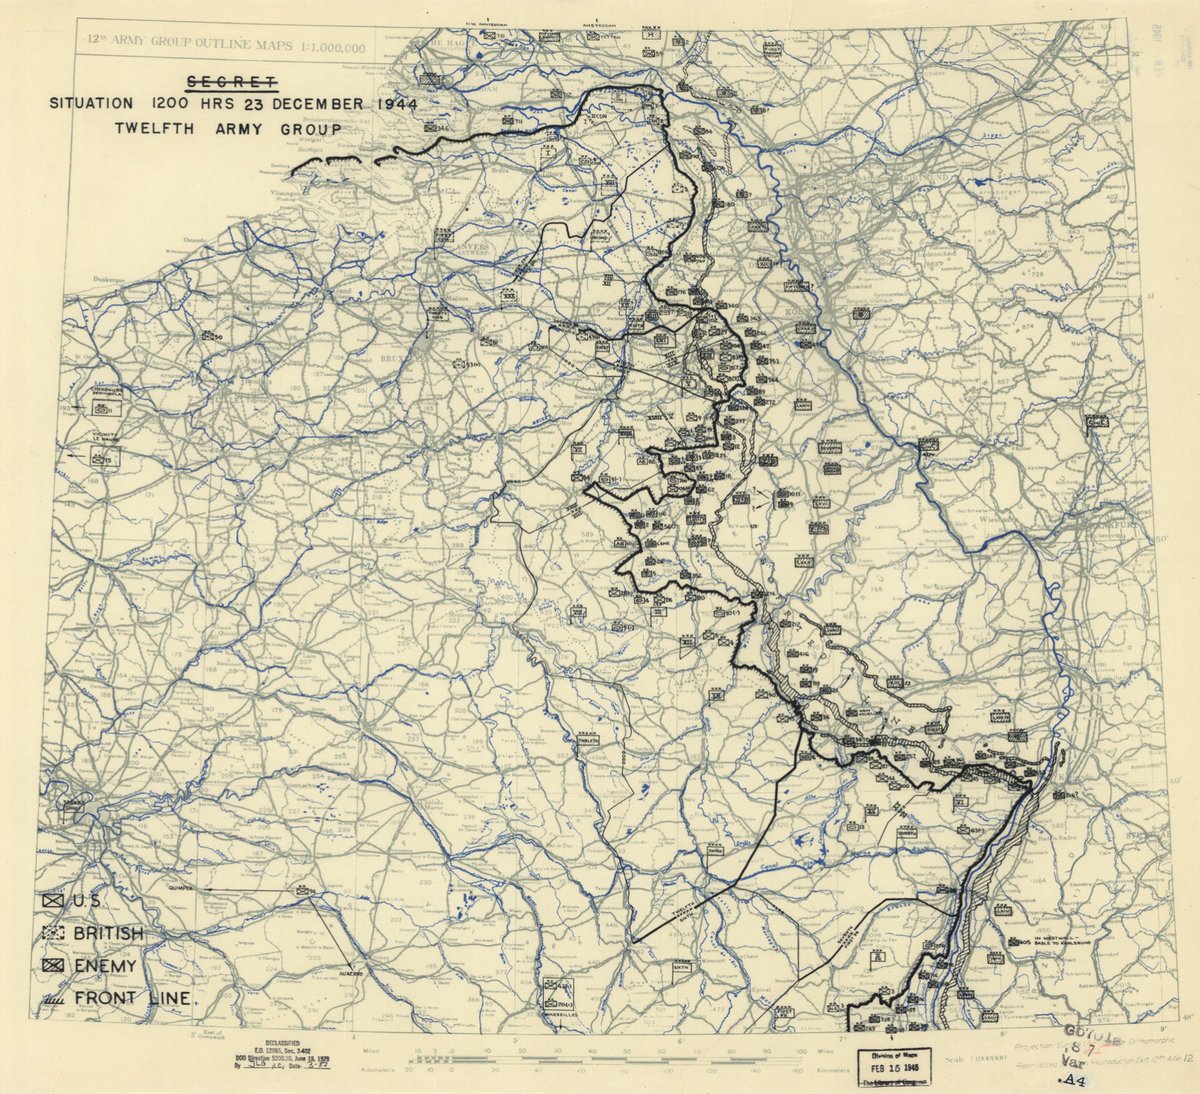 [2 of 9]For the most part, the Allies are holding the line and keeping the Germans from advancing too far. However, the German main push [see the center of this map] now starts to widen and moves north [6th Panzer Army] and south [5th Panzer Army] of Bastogne.